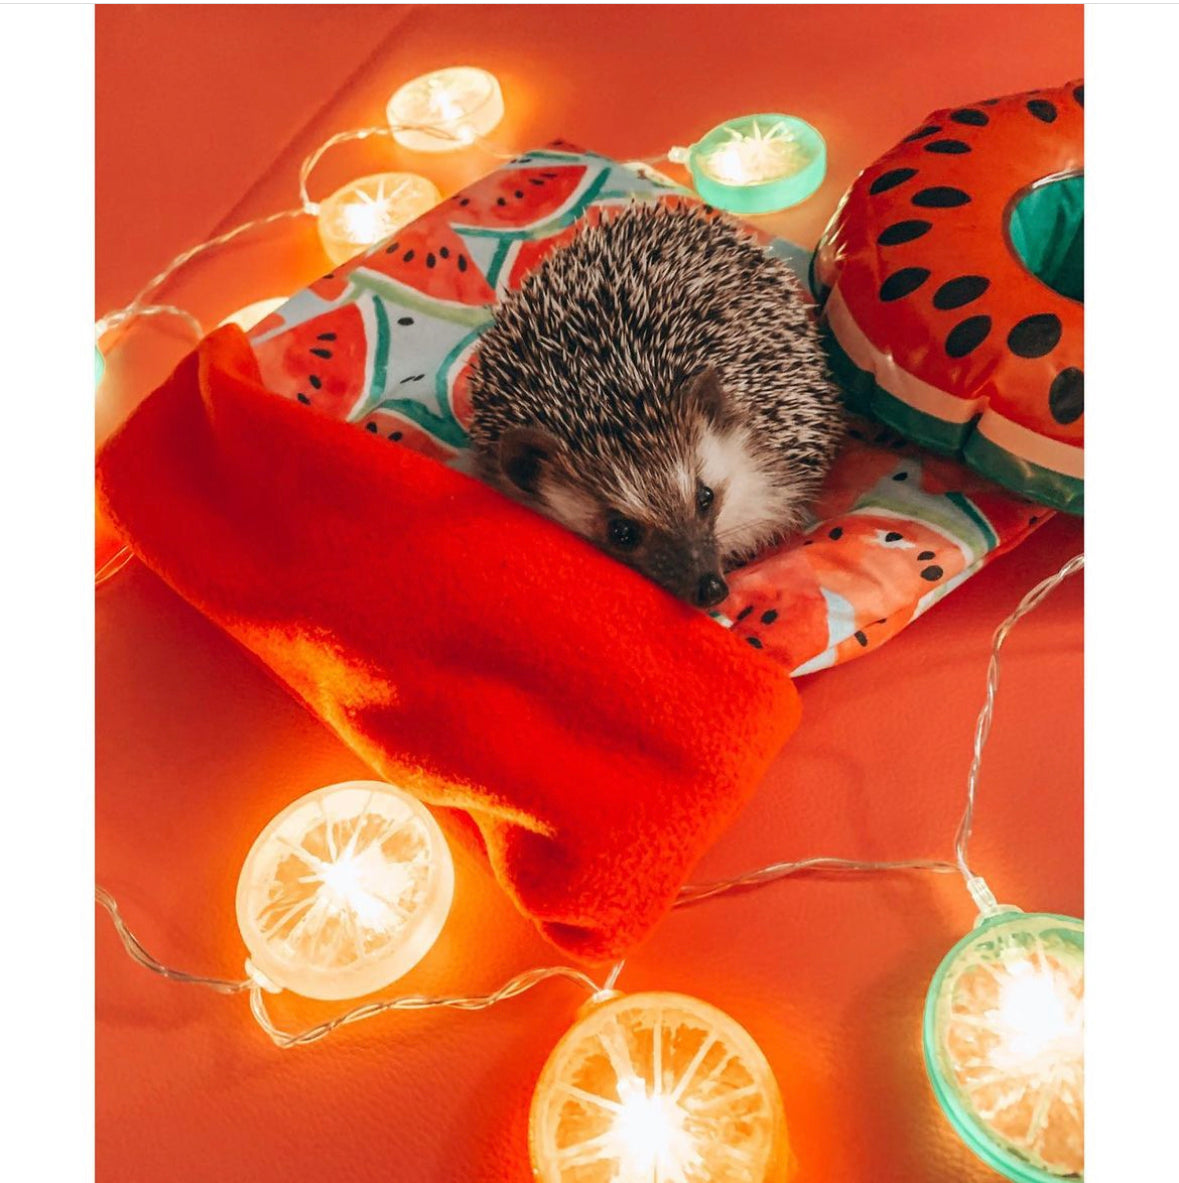 Hedgehog snuggling on top of a watermelon PocketPetPouch snuggle sack with lemon and lime themed lighting on a red background.